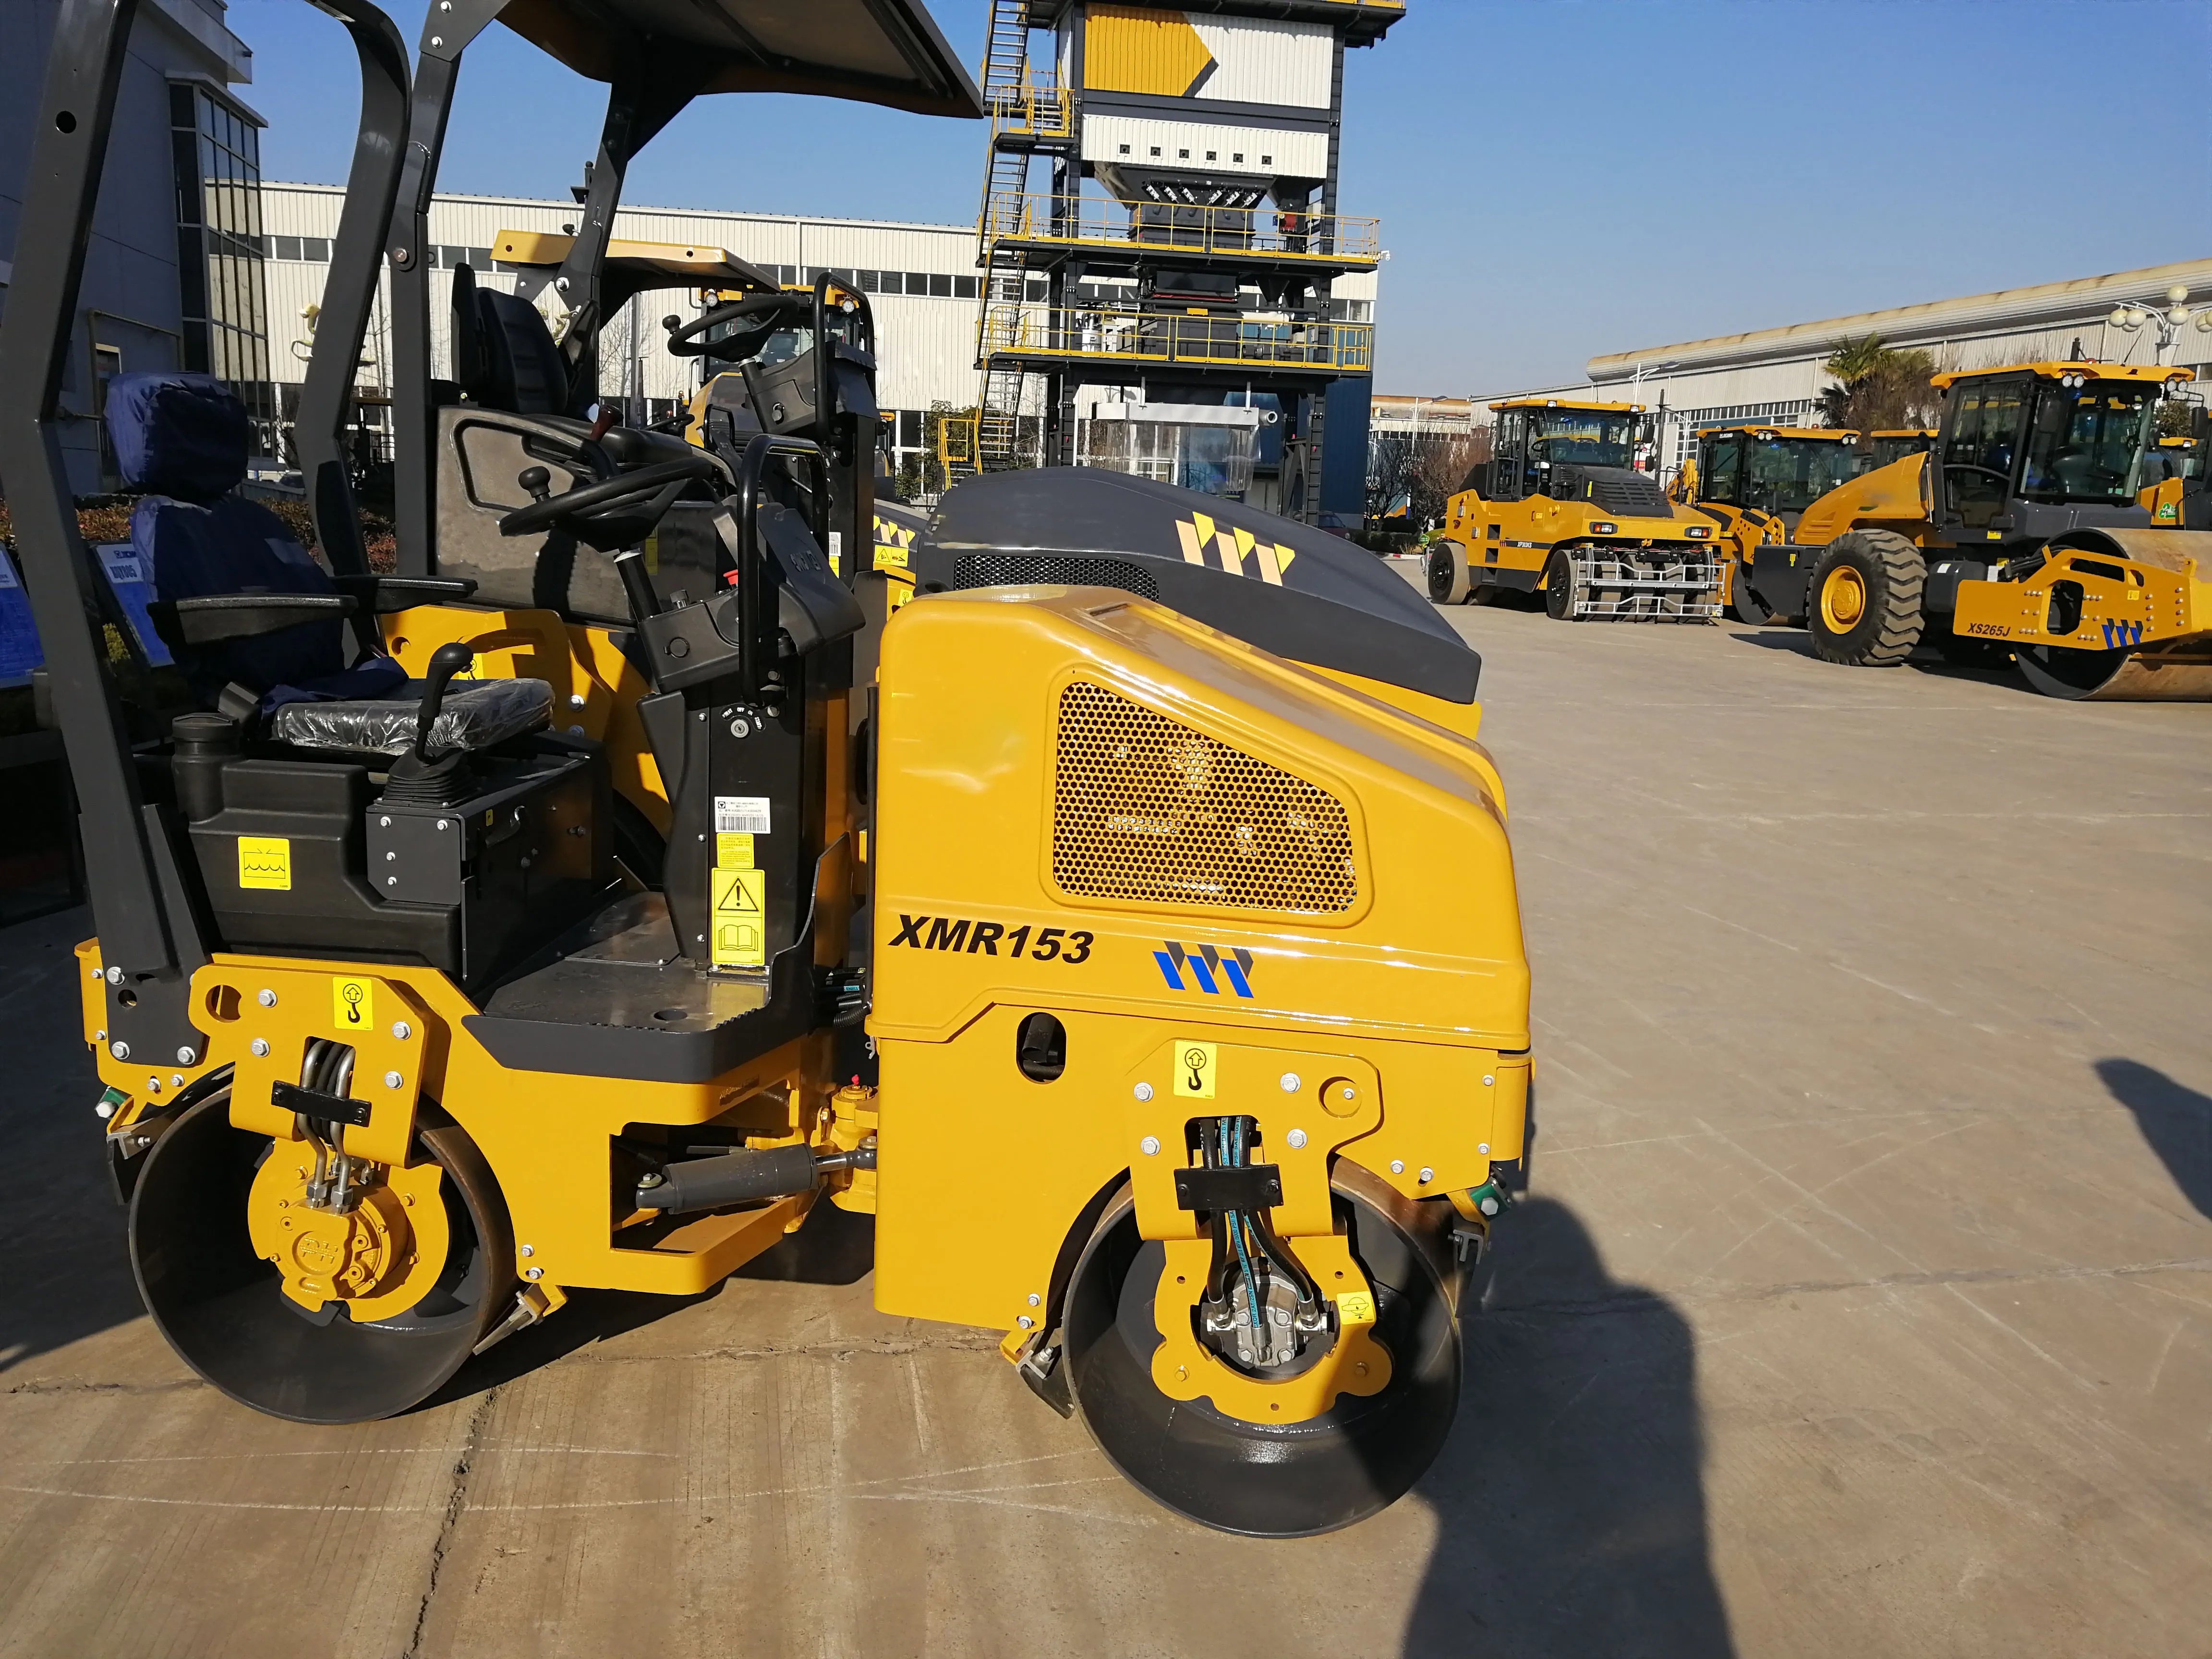 Official 14 Tons Xd143s Double Drum Road Roller Compactor for Sale